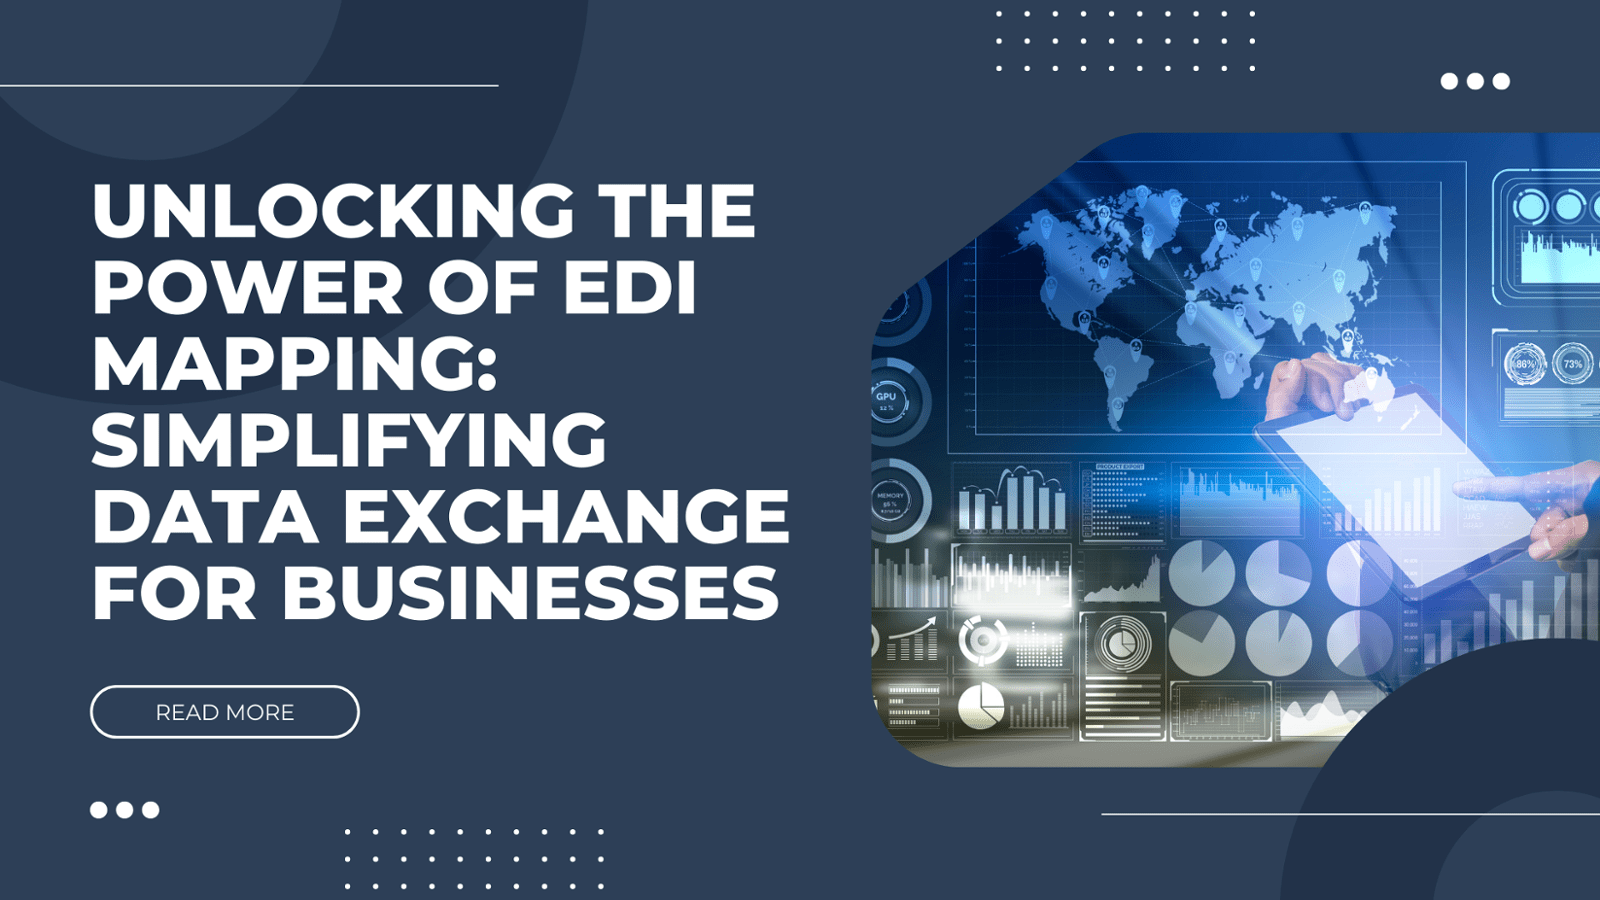  Unlocking the Power of EDI Mapping: Simplifying Data Exchange for Businesses